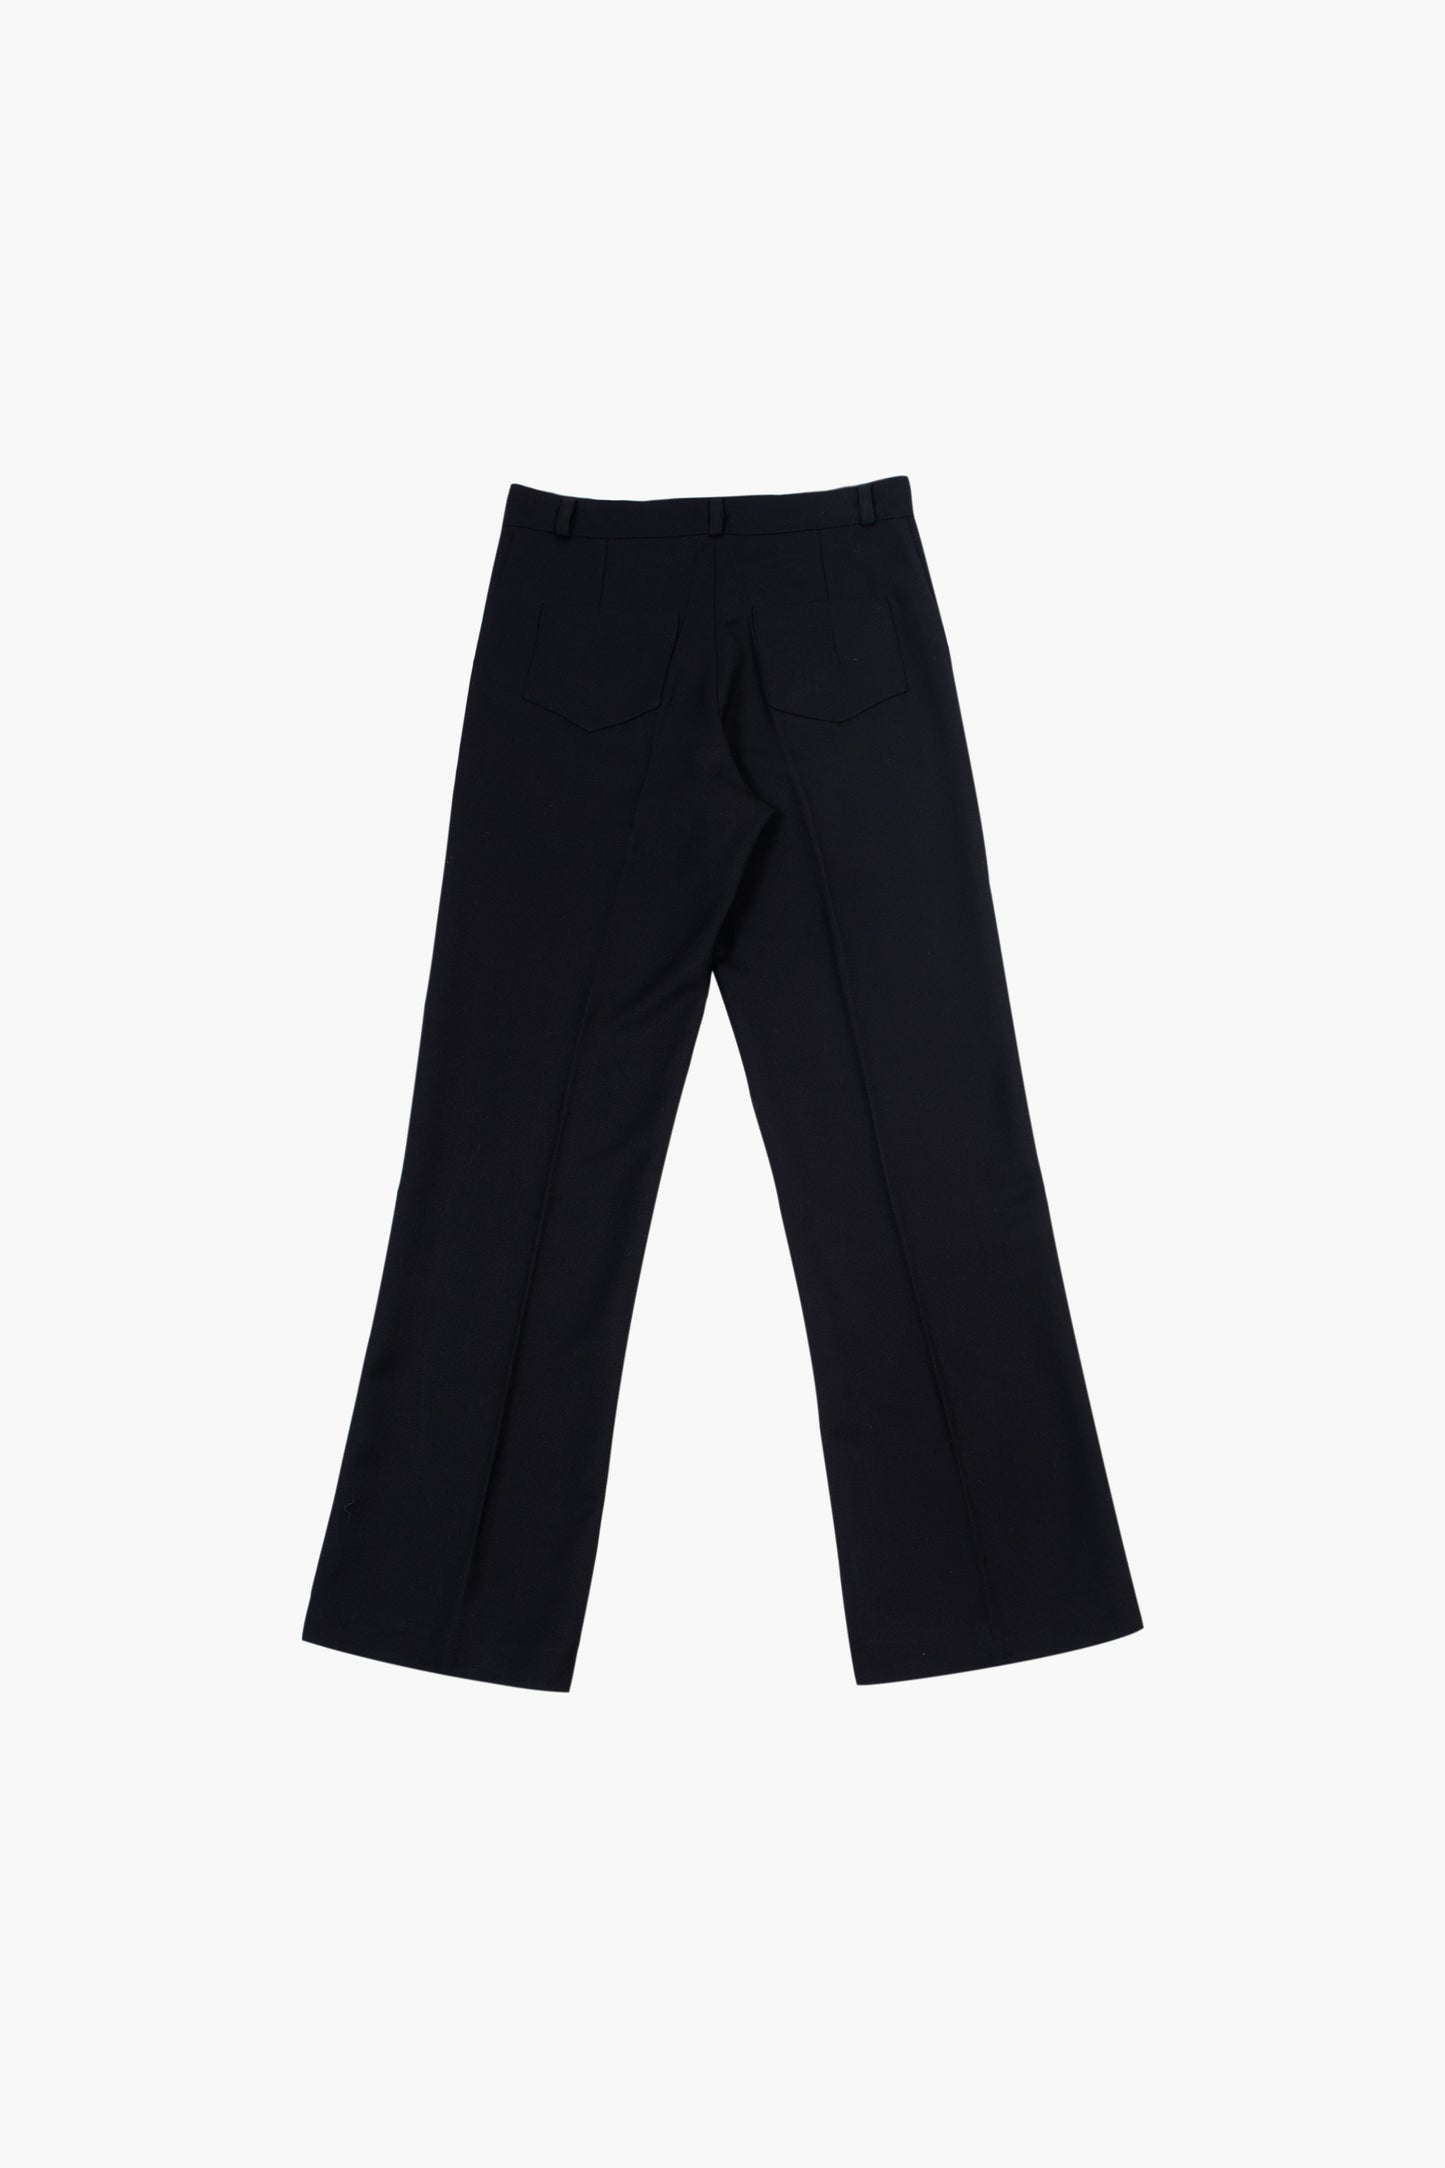 BLACK FLARED COTTON PANTS WITH UB BUTTON